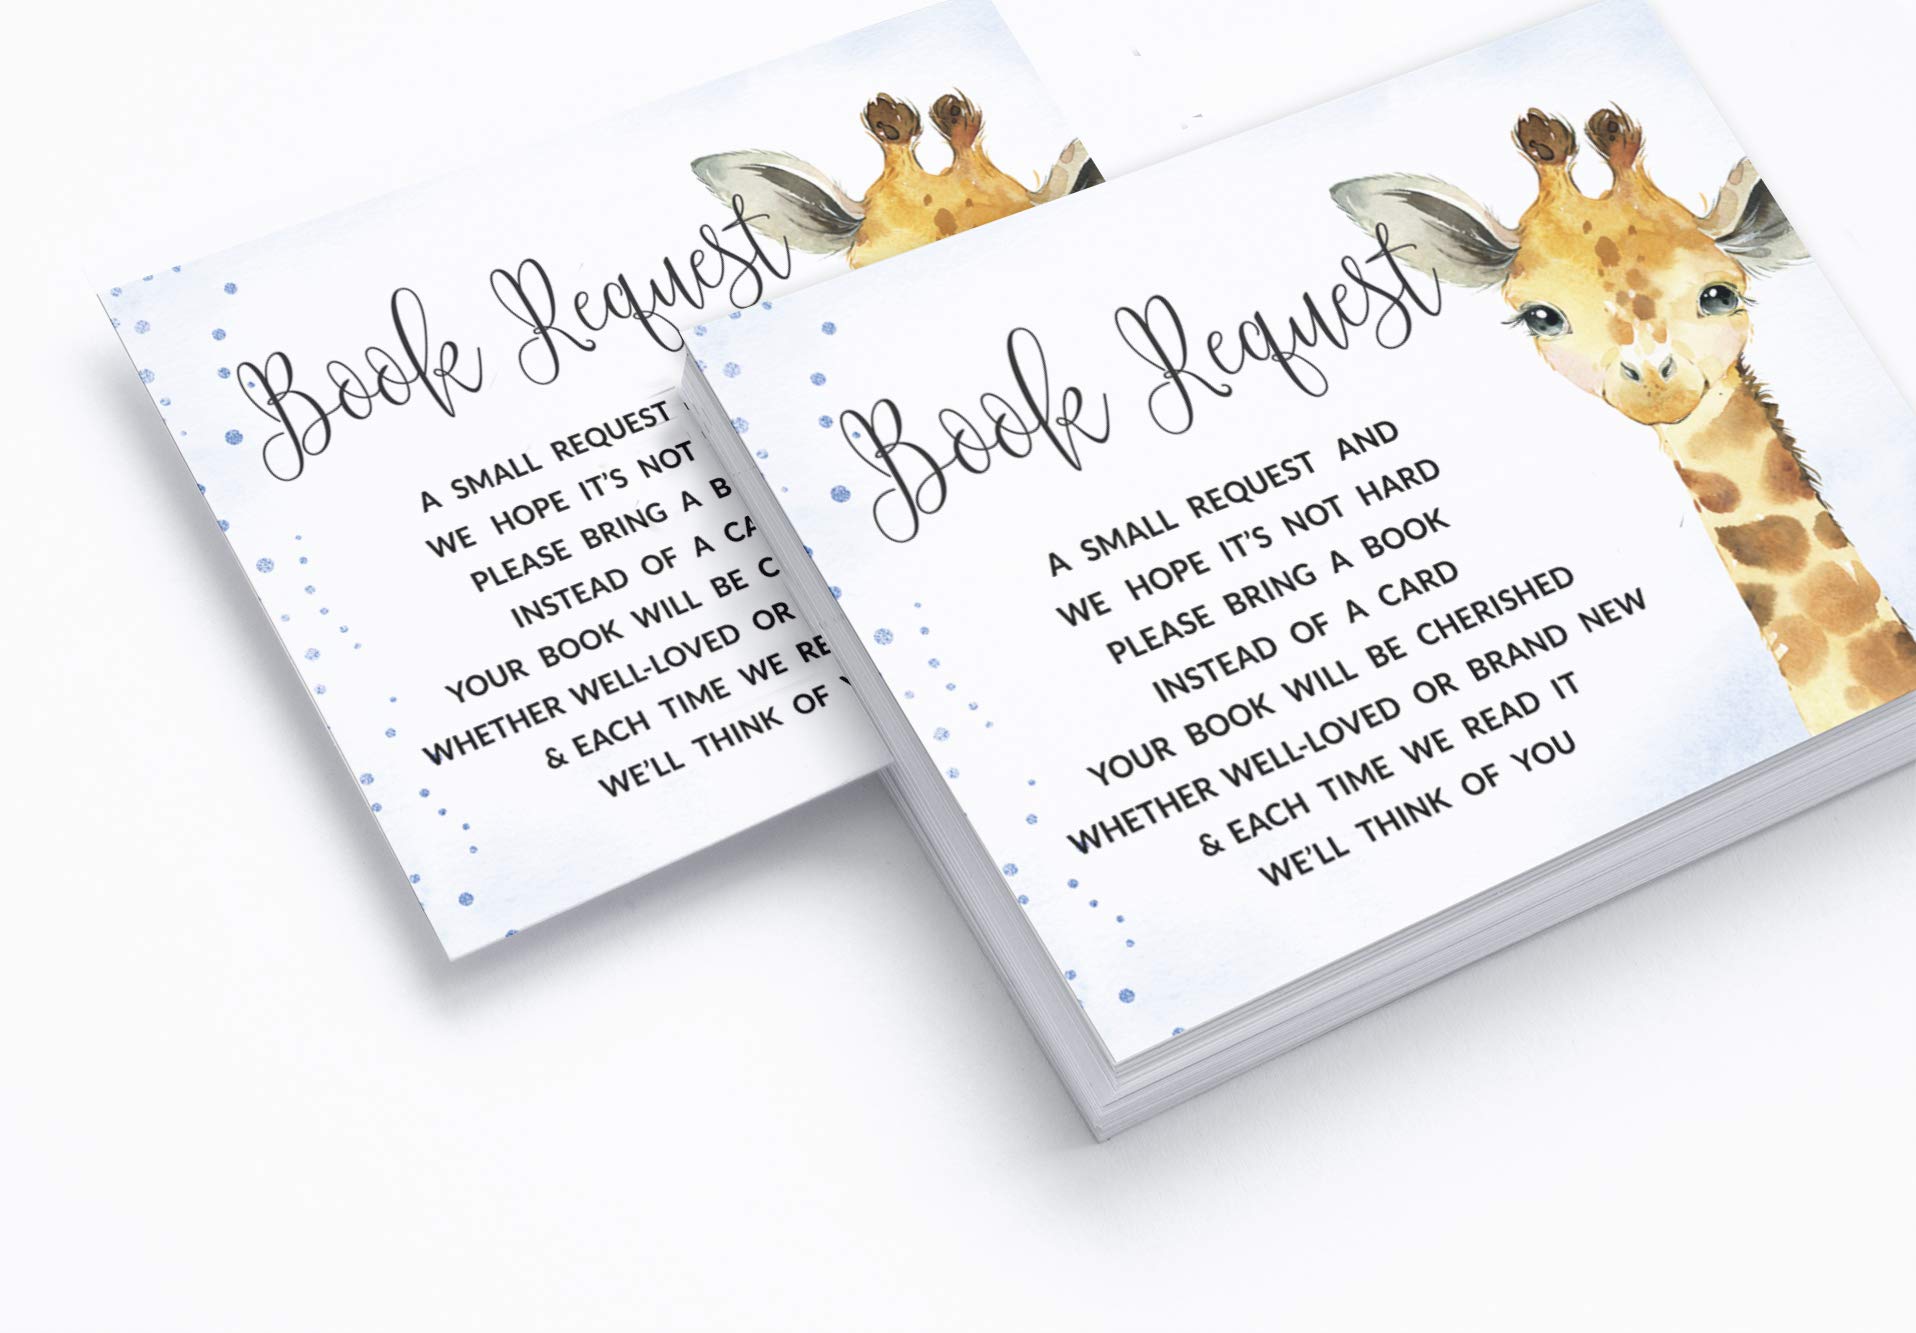 Inkdotpot 30 Books for Baby Shower Request Cards Bring A Book Instead of A Card Giraffe Jungle Animals Baby Shower Invitations Inserts Games